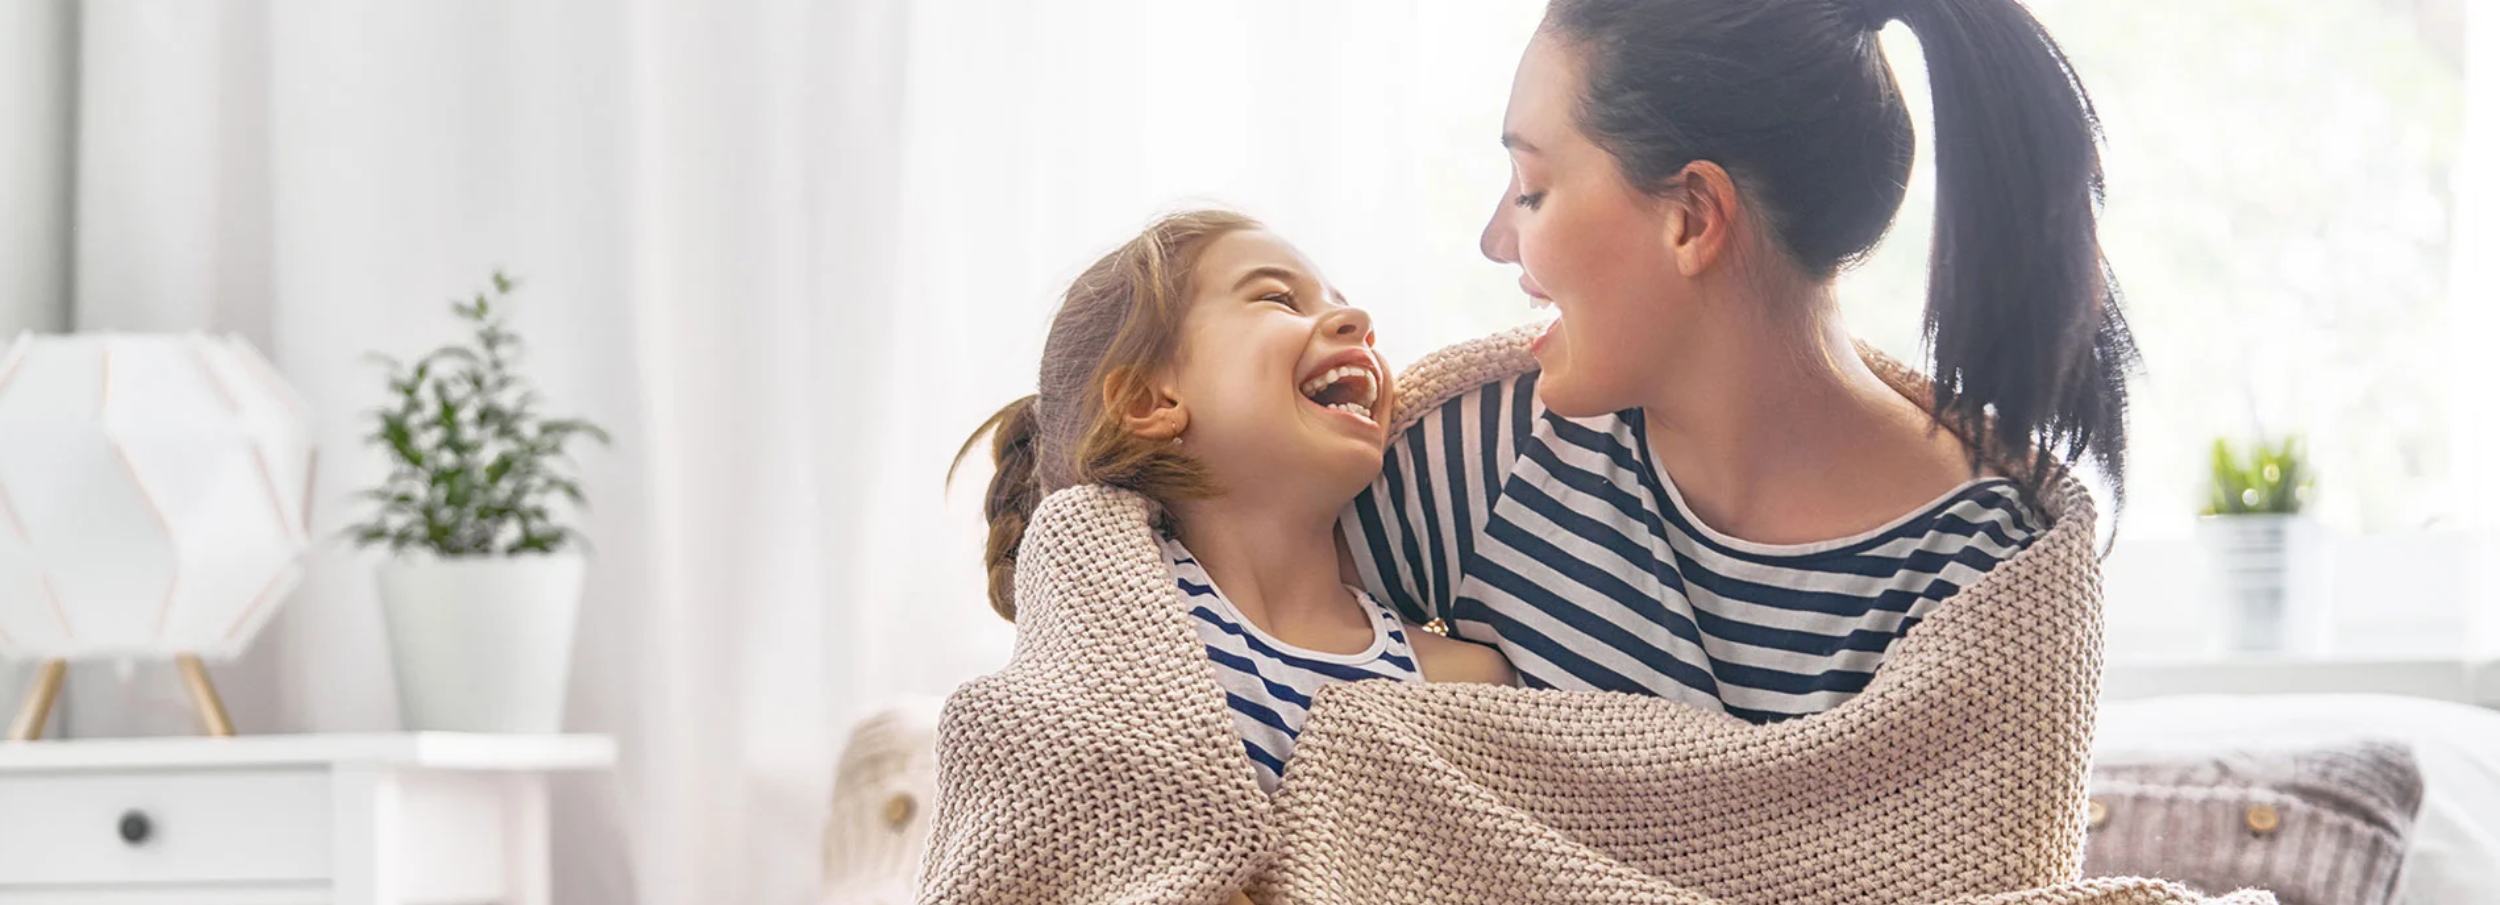 Mother and daughter wrapped in a blanket laughing at each other.